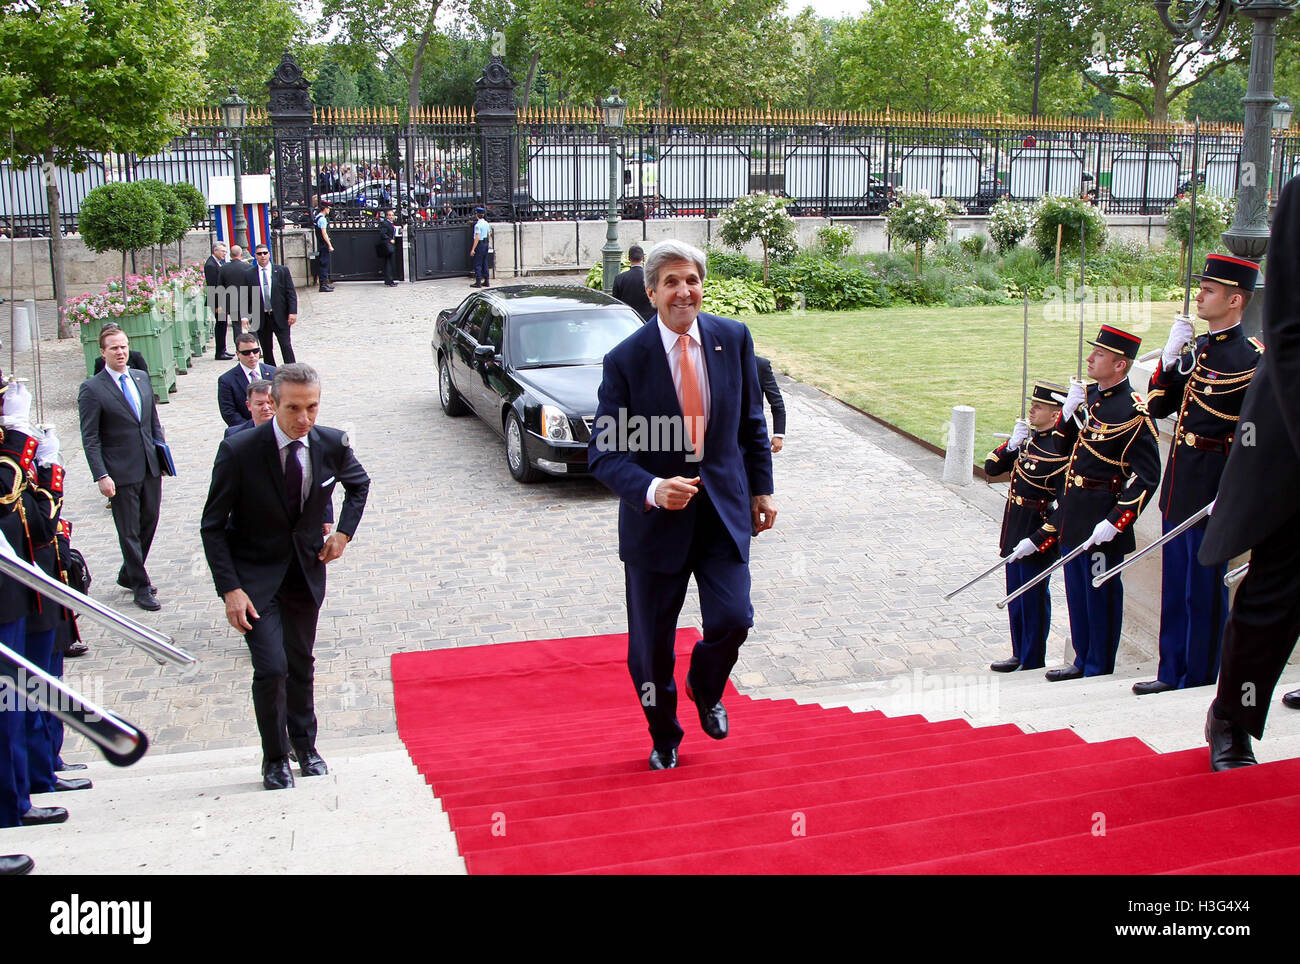 U.S. Secretary of State John Kerry arrives at the French Ministry of Foreign Affairs to meet with French Foreign Minister Jean-Marc Ayrault in Paris, France on July 30, 2016. Stock Photo